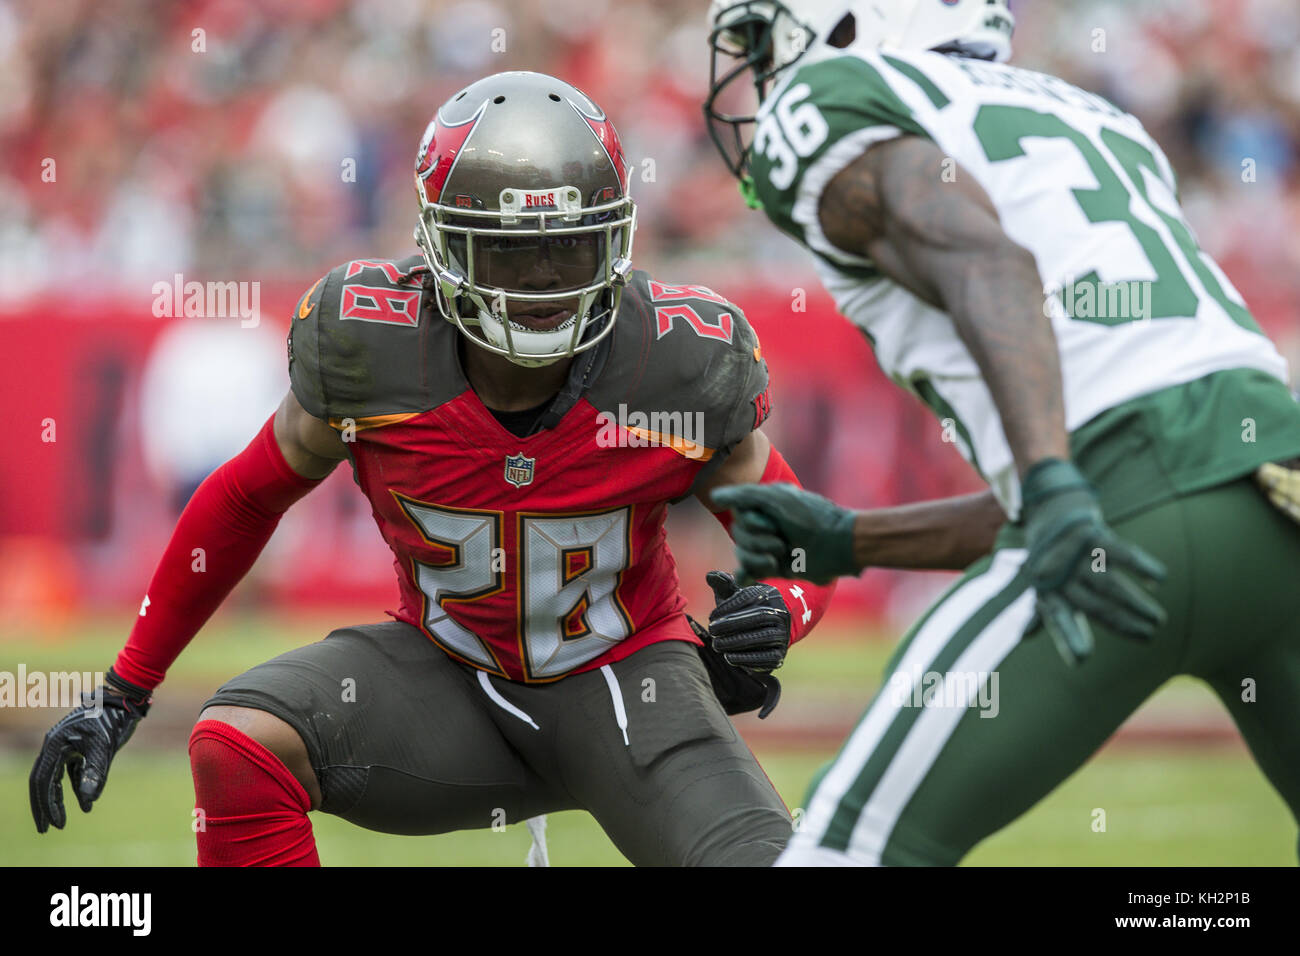 Tampa, Florida, USA. 31st Aug, 2017. Tampa Bay Buccaneers cornerback Vernon Hargreaves (28) looks to defend against New York Jets defensive back Doug Middleton (36) during the game on Sunday November 12, 2017 at Raymond James Stadium in Tampa, Florida. Credit: Travis Pendergrass/ZUMA Wire/Alamy Live News Stock Photo